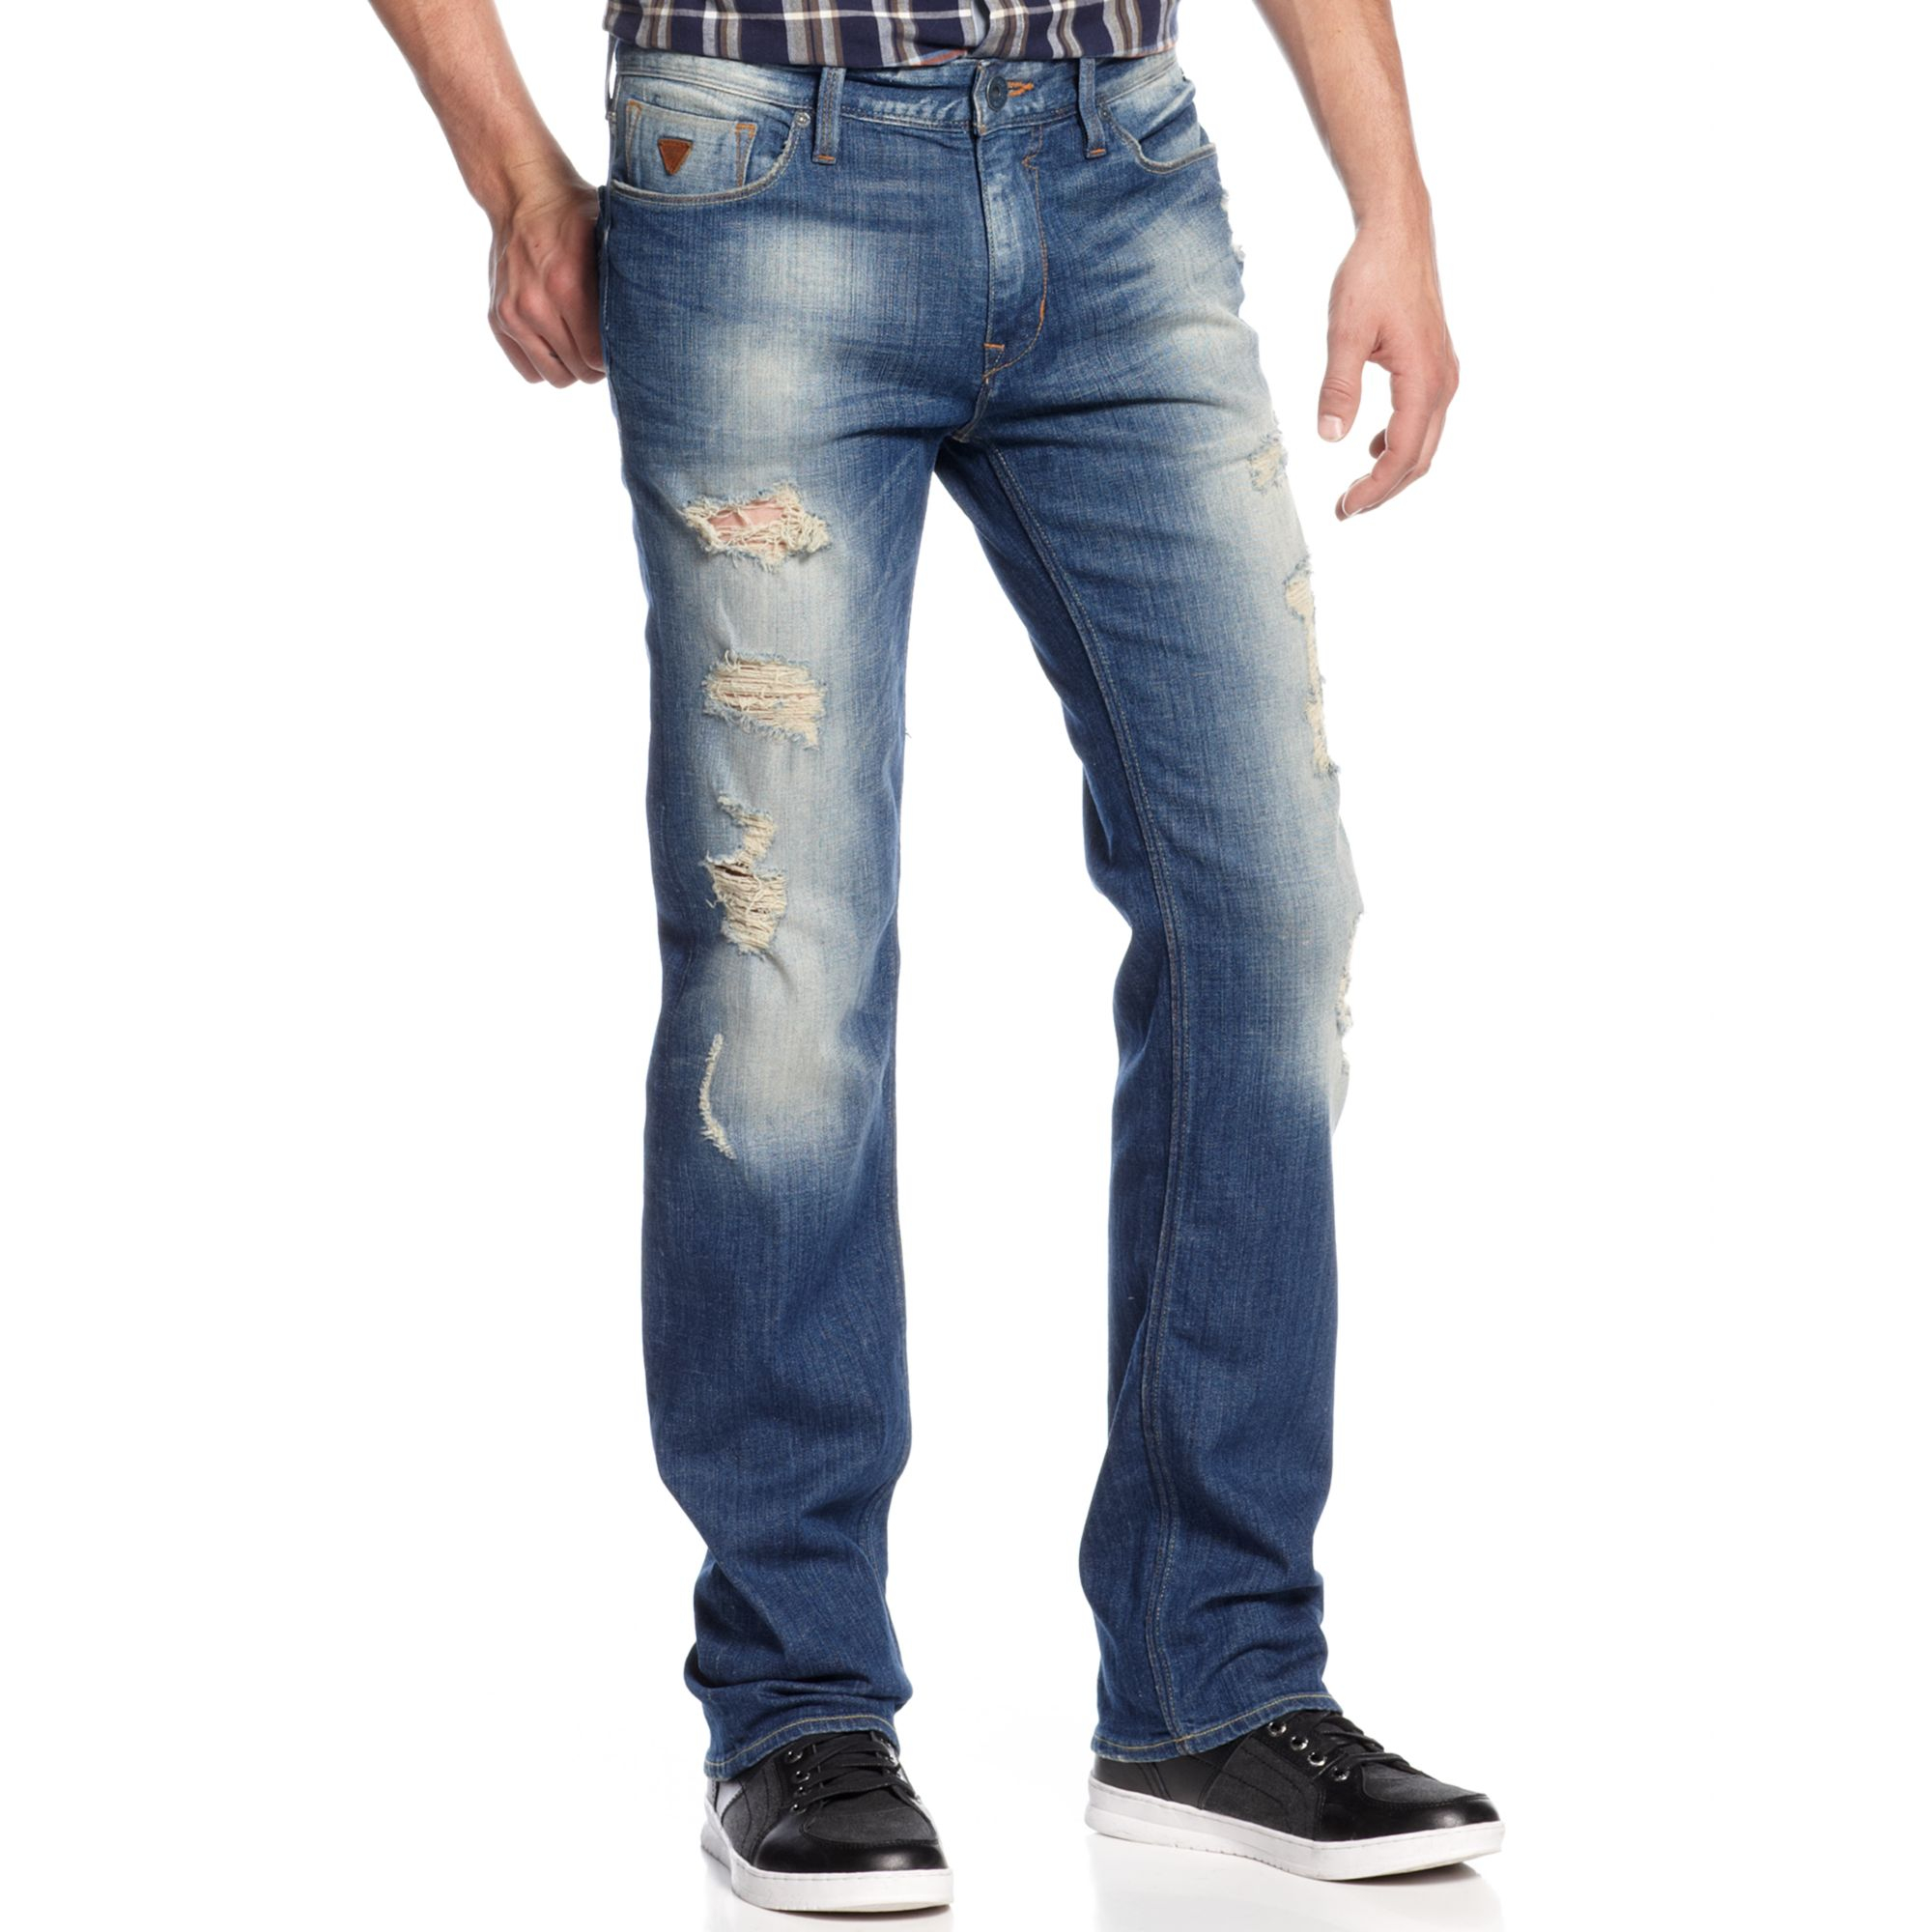 Lyst - Guess Armada Wash Slim Straight Jeans in Blue for Men